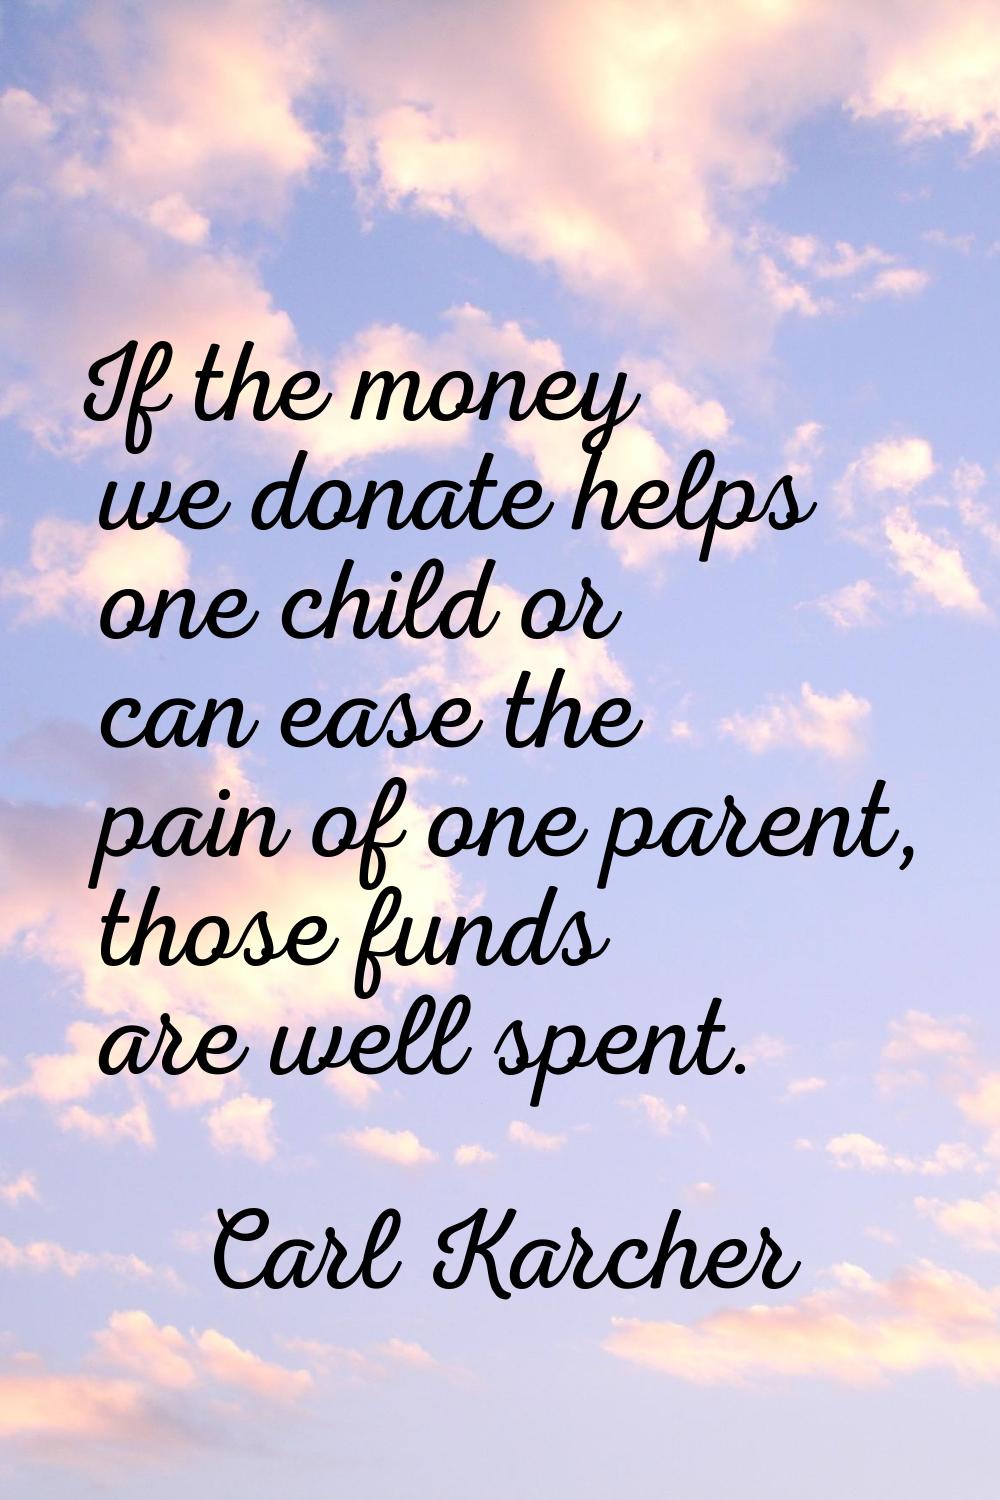 If the money we donate helps one child or can ease the pain of one parent, those funds are well spe